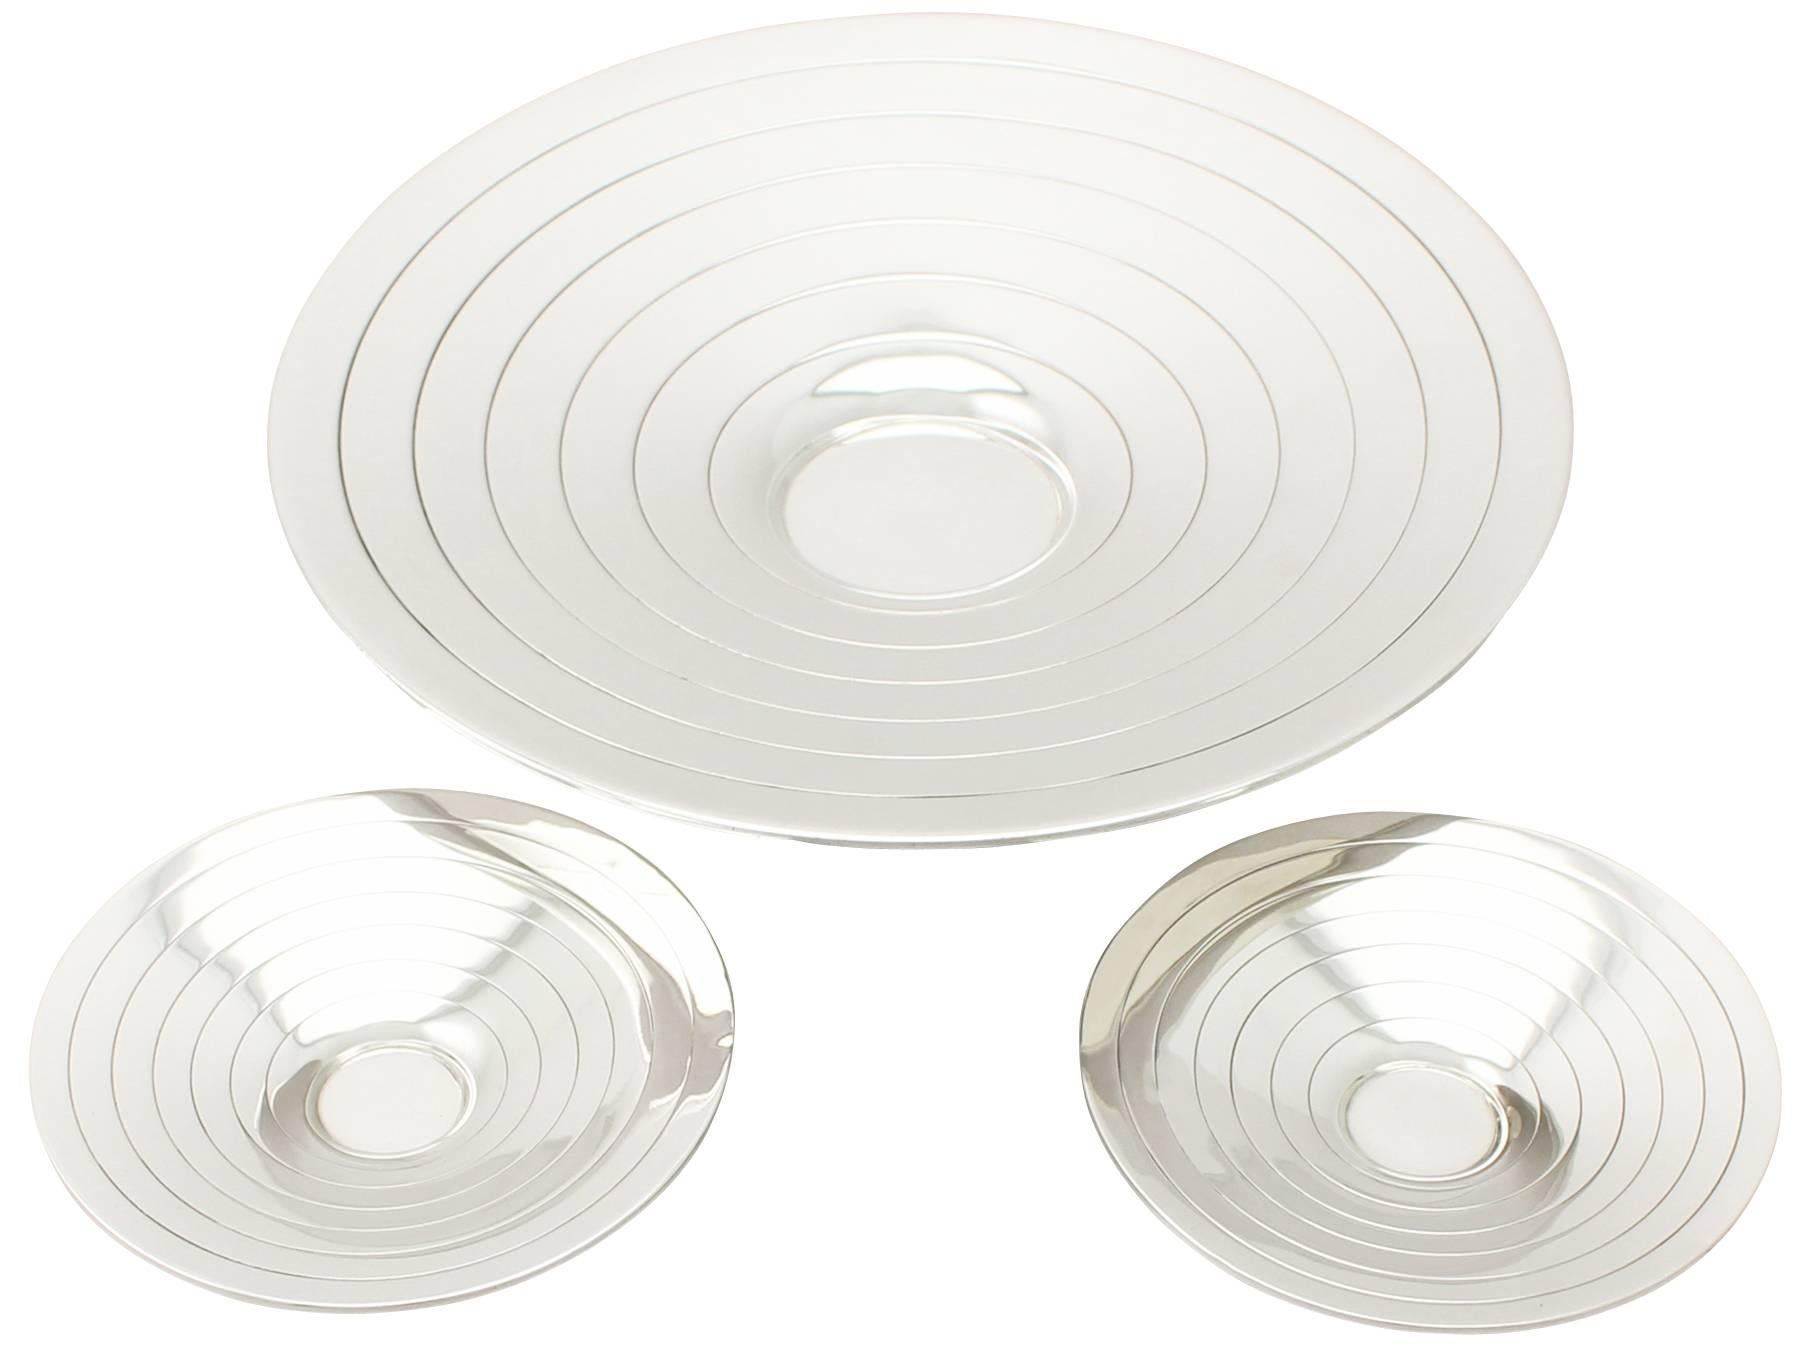 A fine and impressive suite of three antique George V English sterling silver dishes – Art Deco style; an addition to our dining silverware collection

These fine antique George V sterling silver dishes have a circular flared form onto a stepped